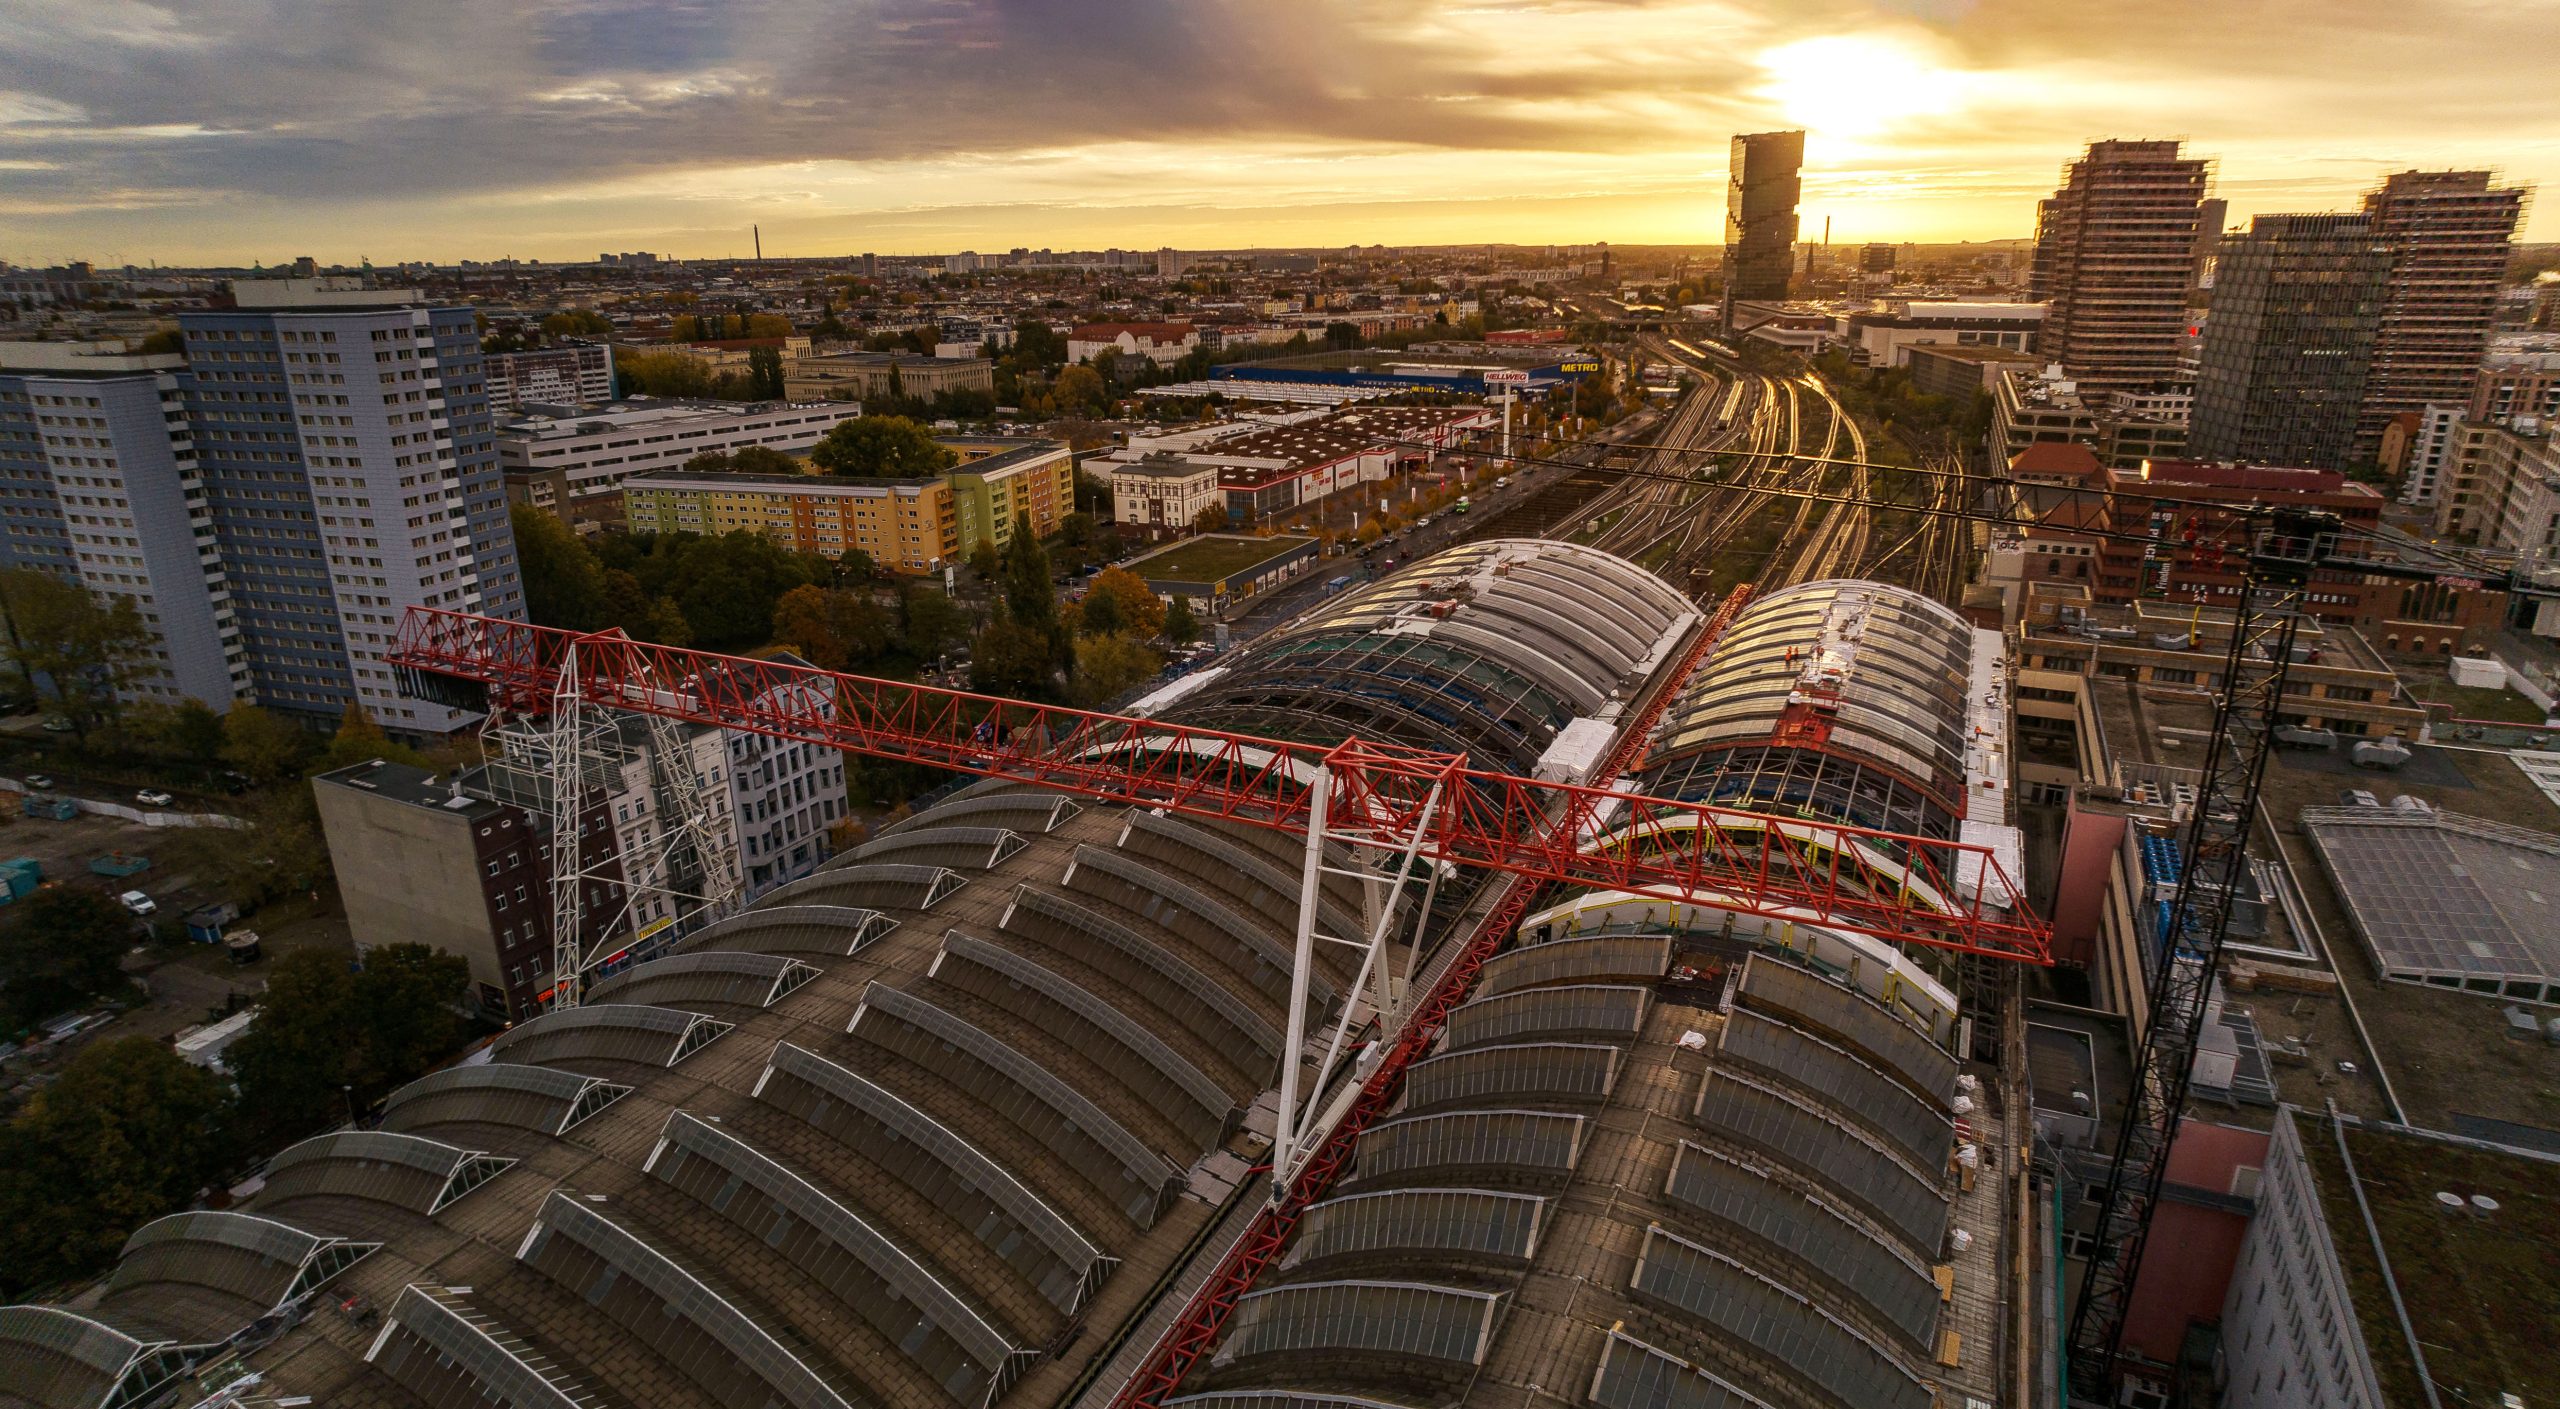 Berlin Ostbahnhof: Aerial view in the afternoon